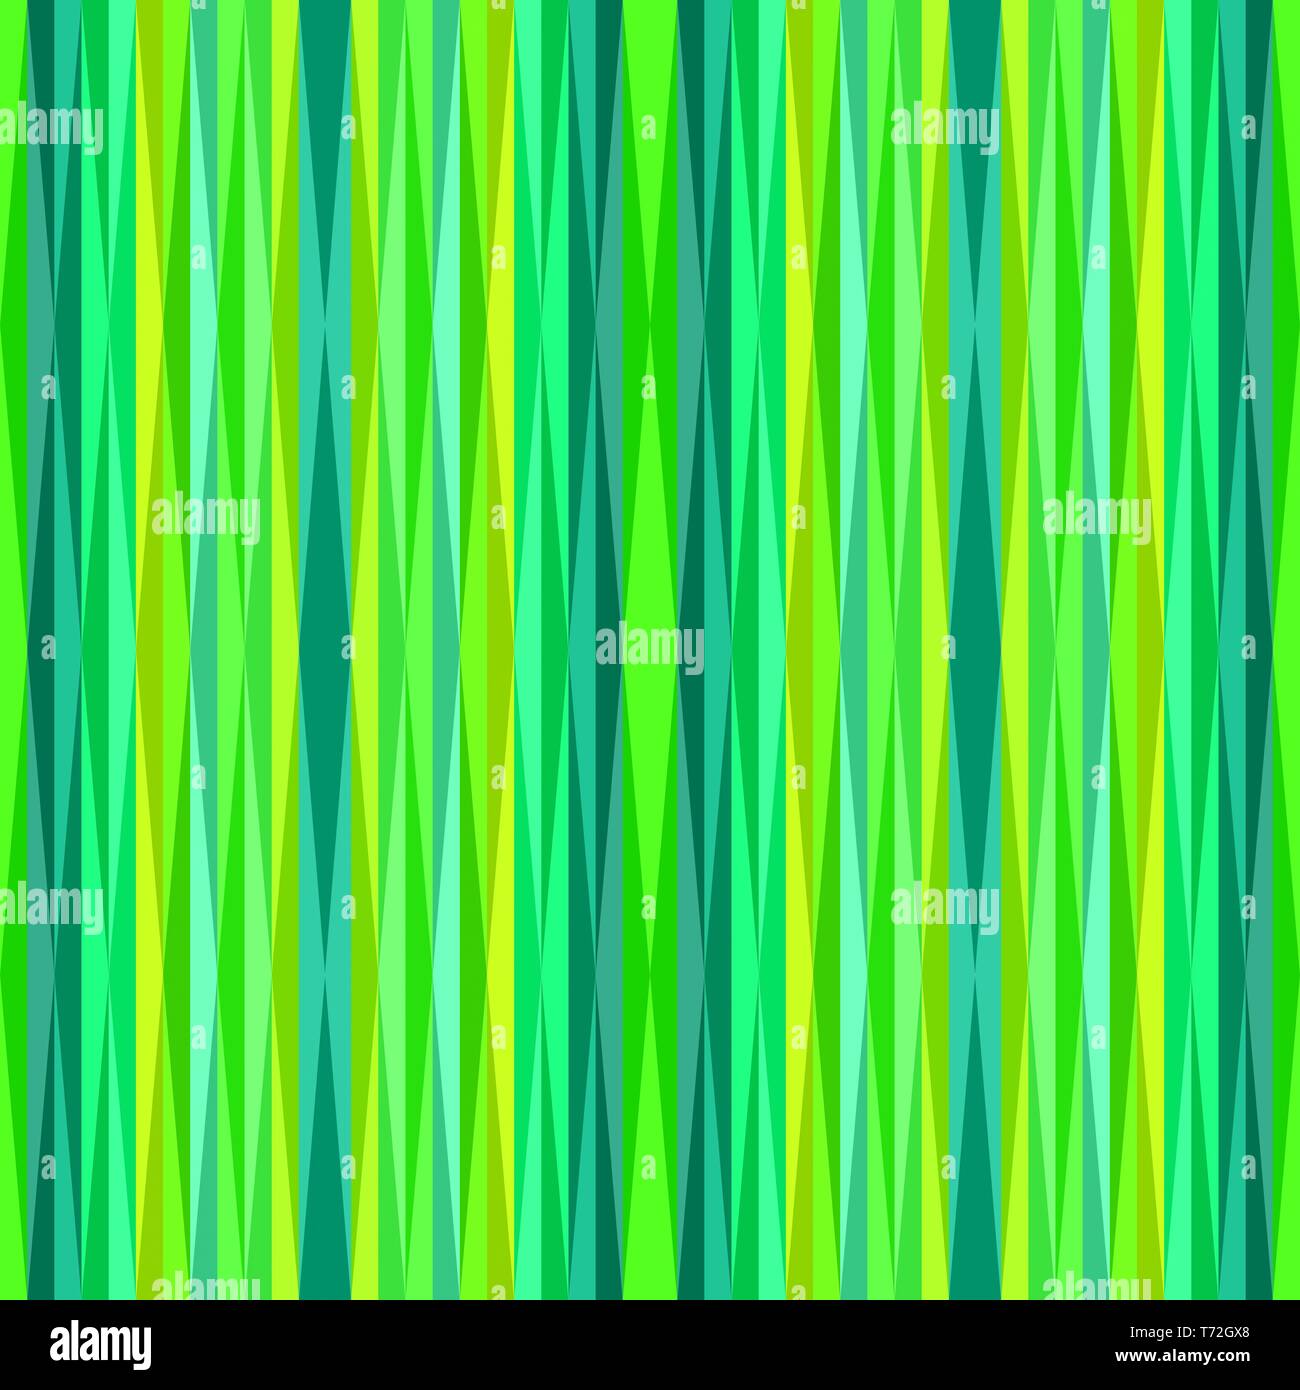 Galerie Just Kitchens Awning Stripe Wallpaper - G45401 - Green